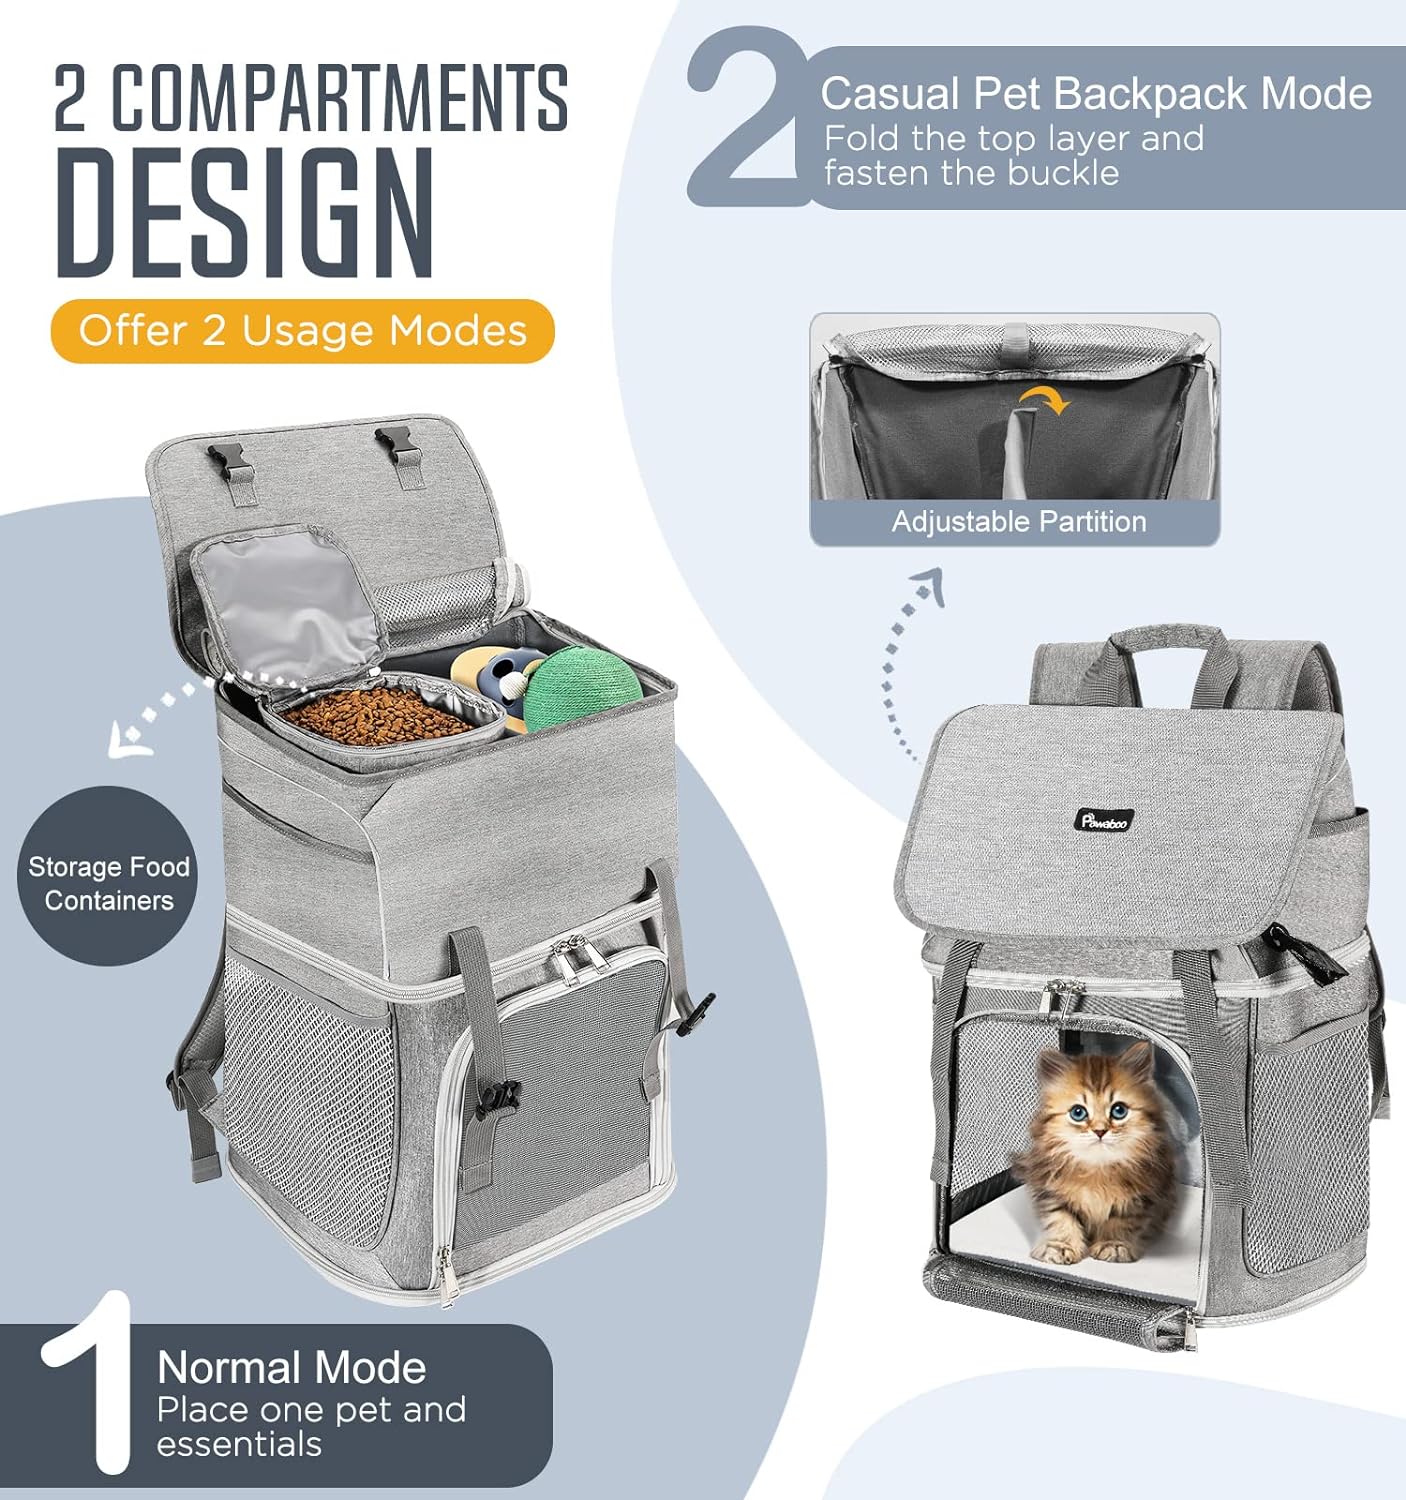 Large Pet Carrier Backpack, Cat Backpack or Small Dog Backpack for Travel , Cat Carry Bag with Food Container & Super Ventilated Design, Perfect for Traveling/Hiking/Camping,Gray